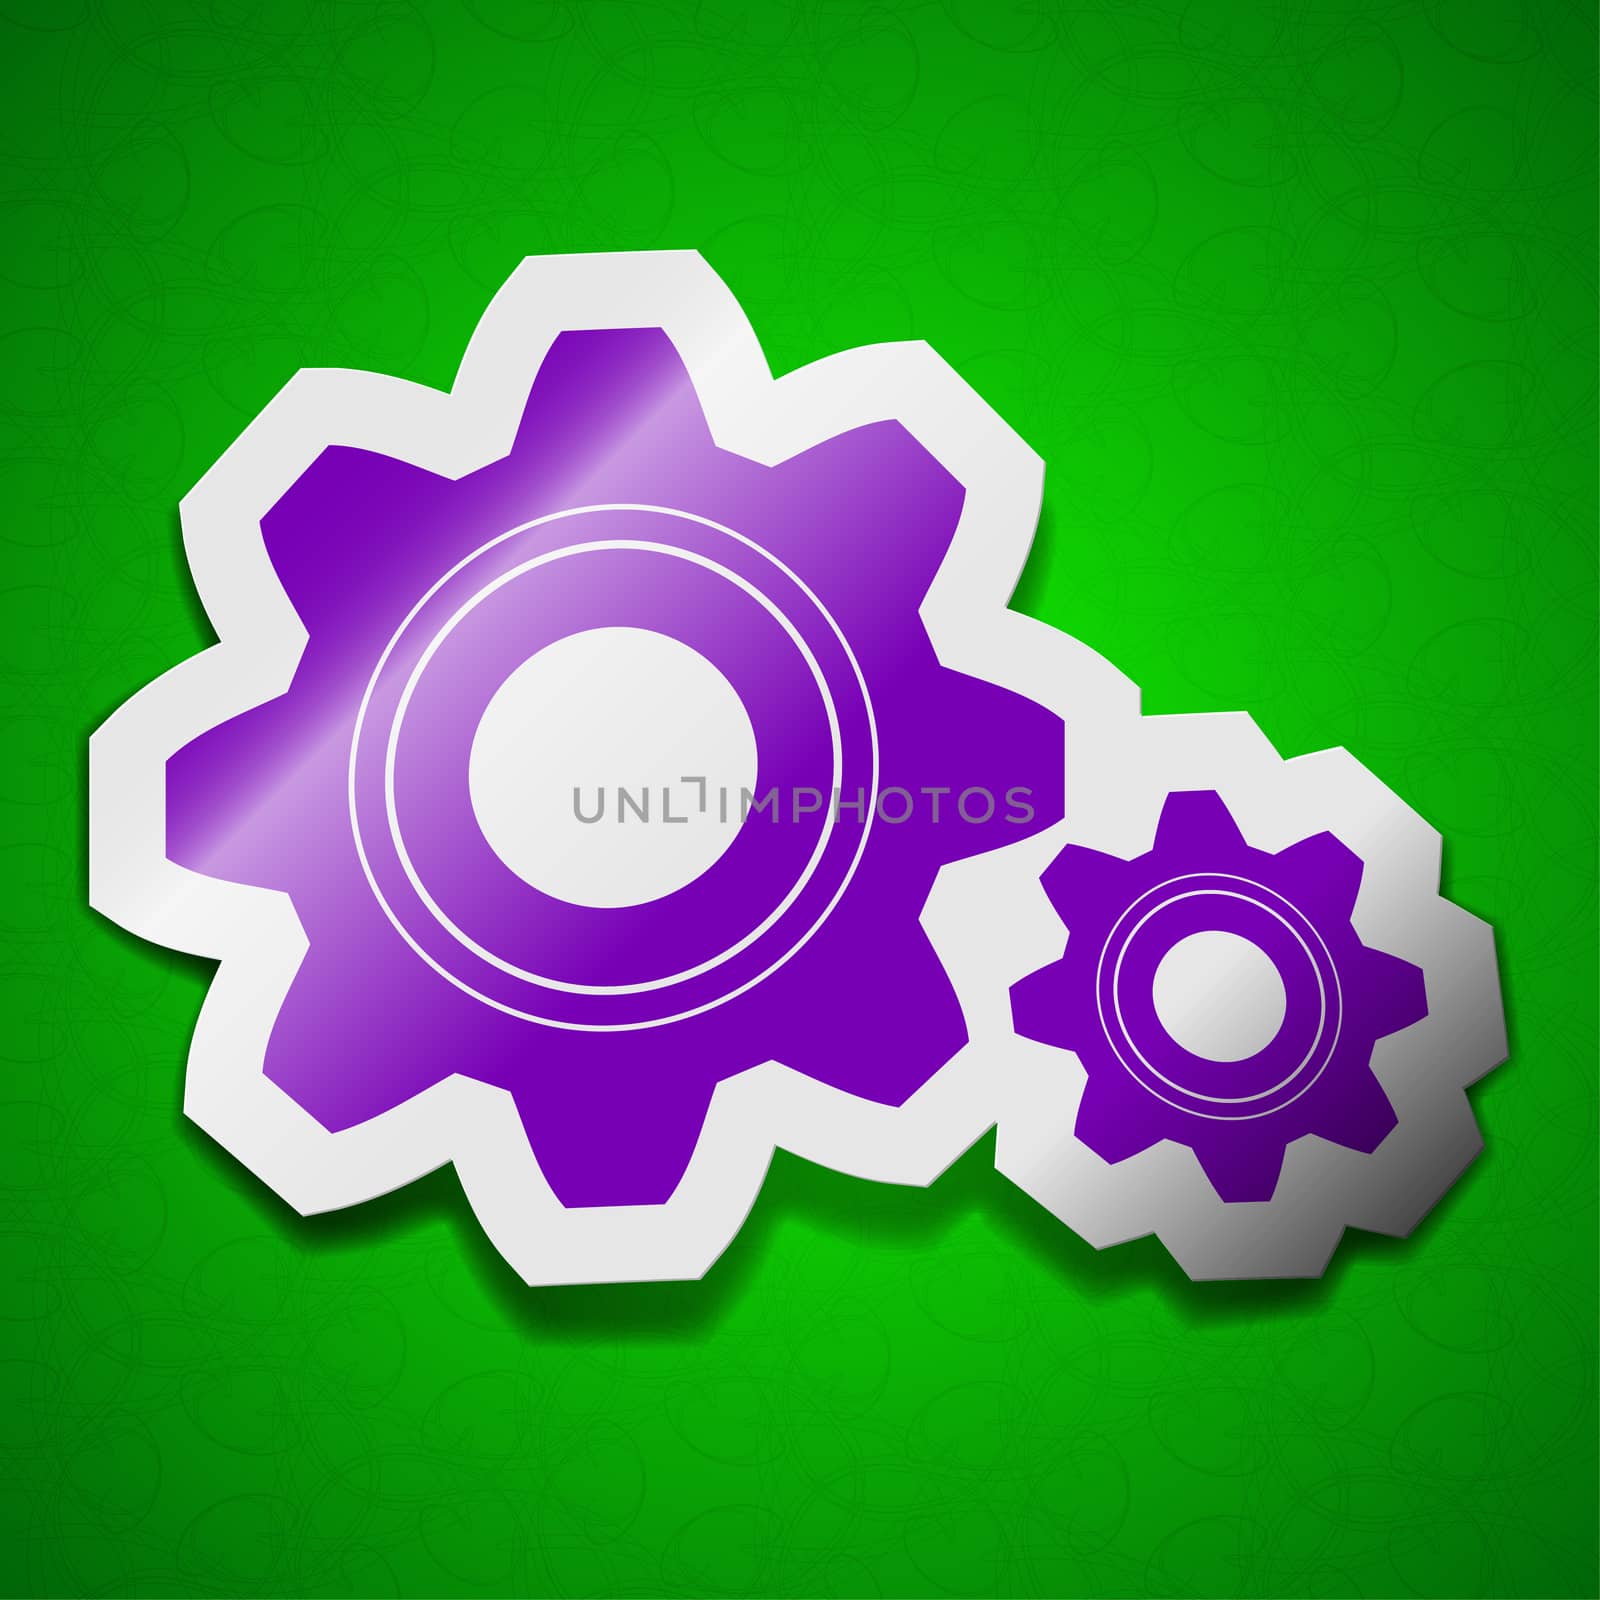 Cog settings icon sign. Symbol chic colored sticky label on green background.  illustration